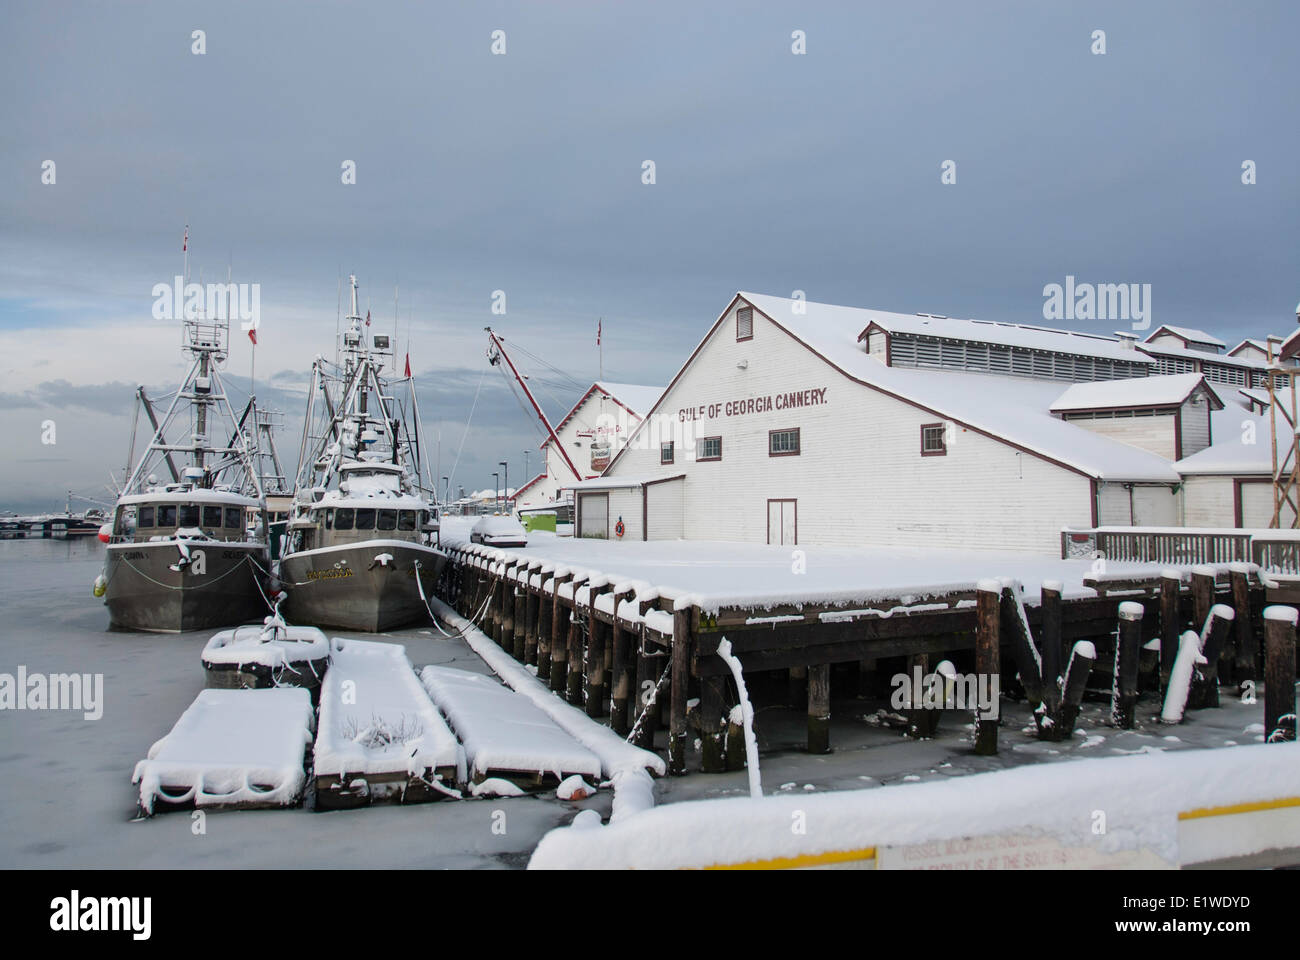 Winter time for the gulf of Georgia Cannery, Steveston, Richmond, Metro Vancouver, British Columbia, Canada Stock Photo